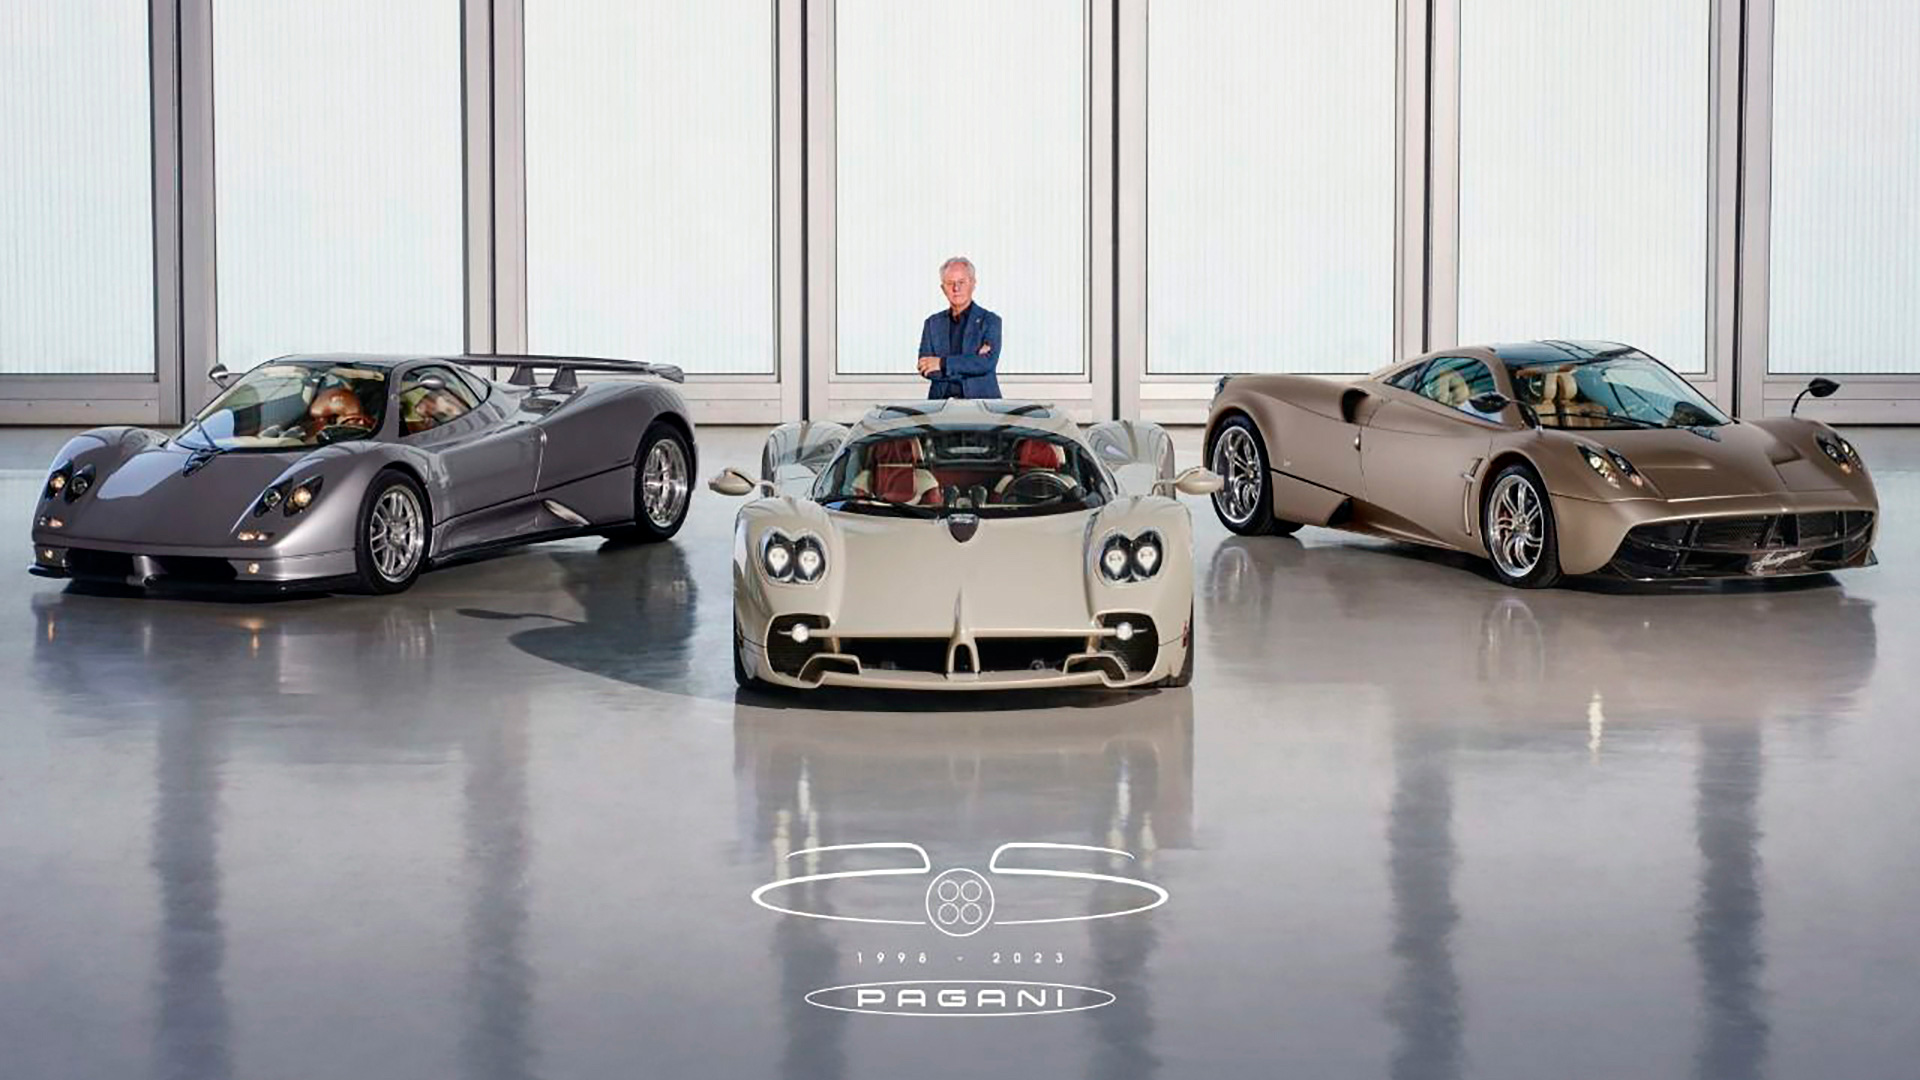 Horacio Pagani and his three beautiful creations, preparing for great festivities to be held in mid-June